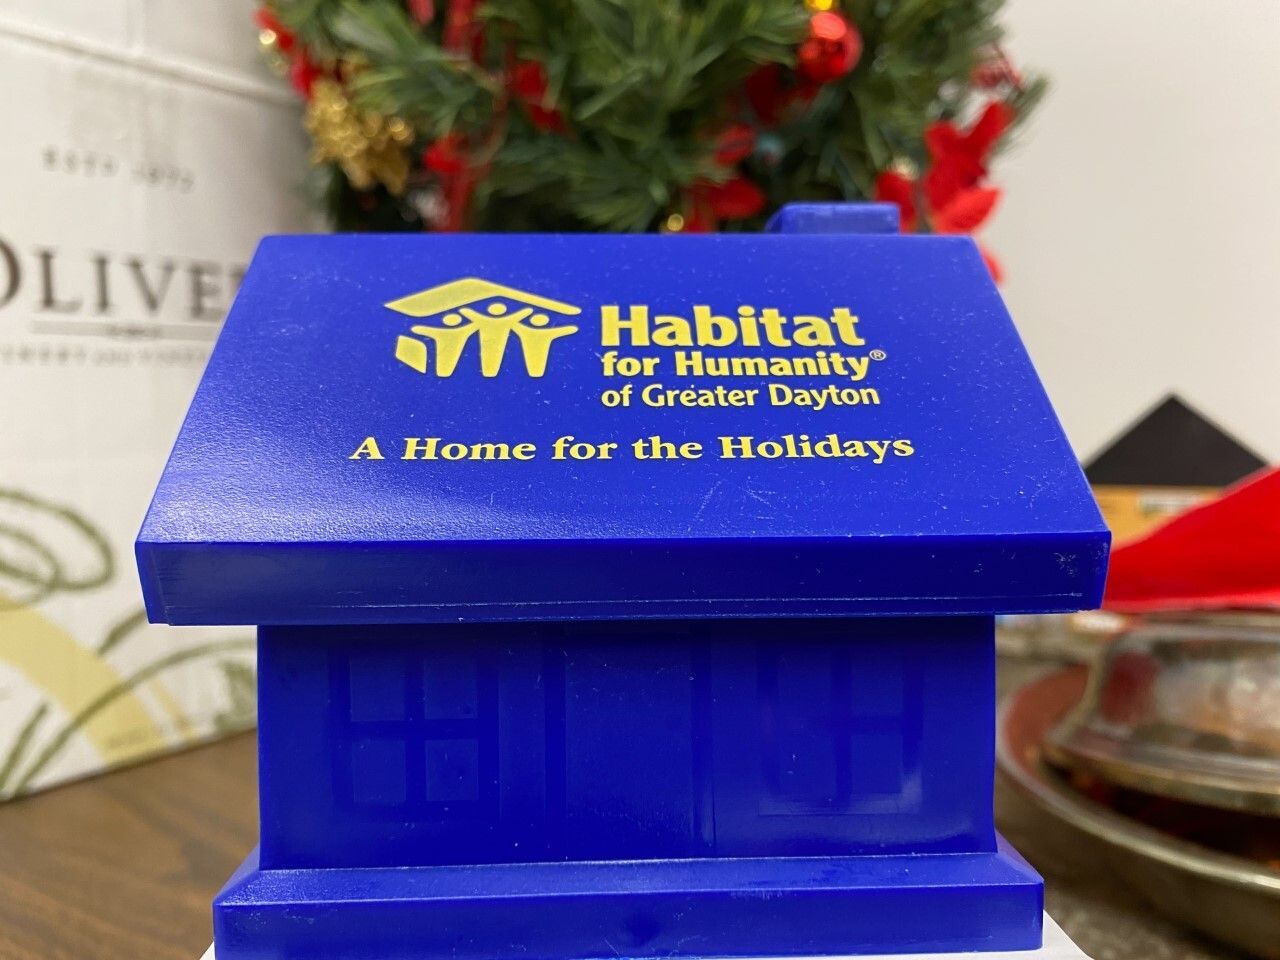 Blue plastic coin. bank shaped like a house. The bank bears the logo of Habitat for Humanity of Greater Dayton.